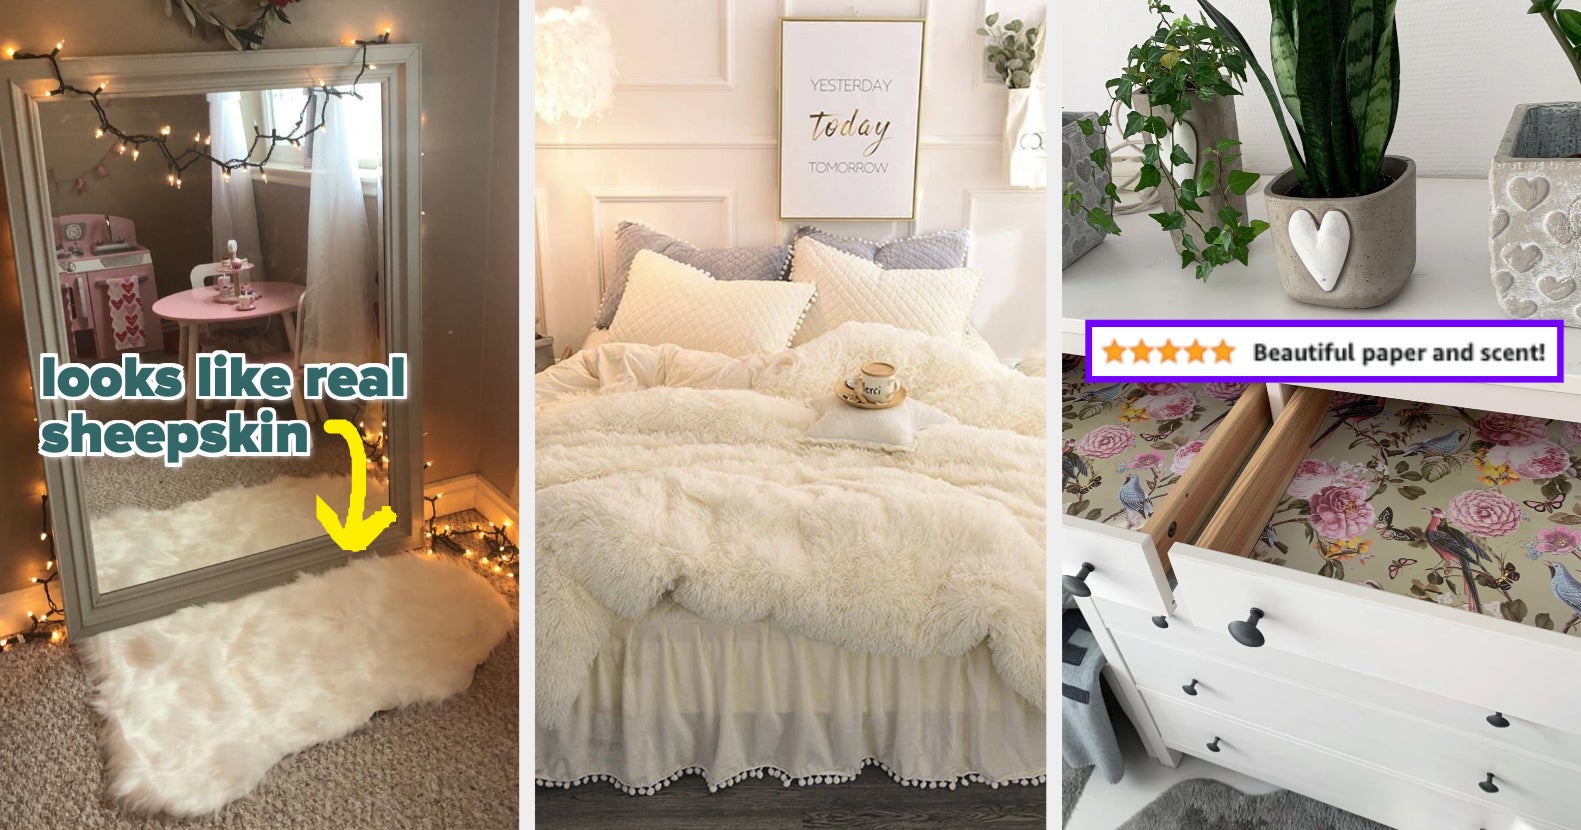 36 Cozy Earthy Bedroom Decor Ideas That Will Make You Want To Cuddle Up &  Relax